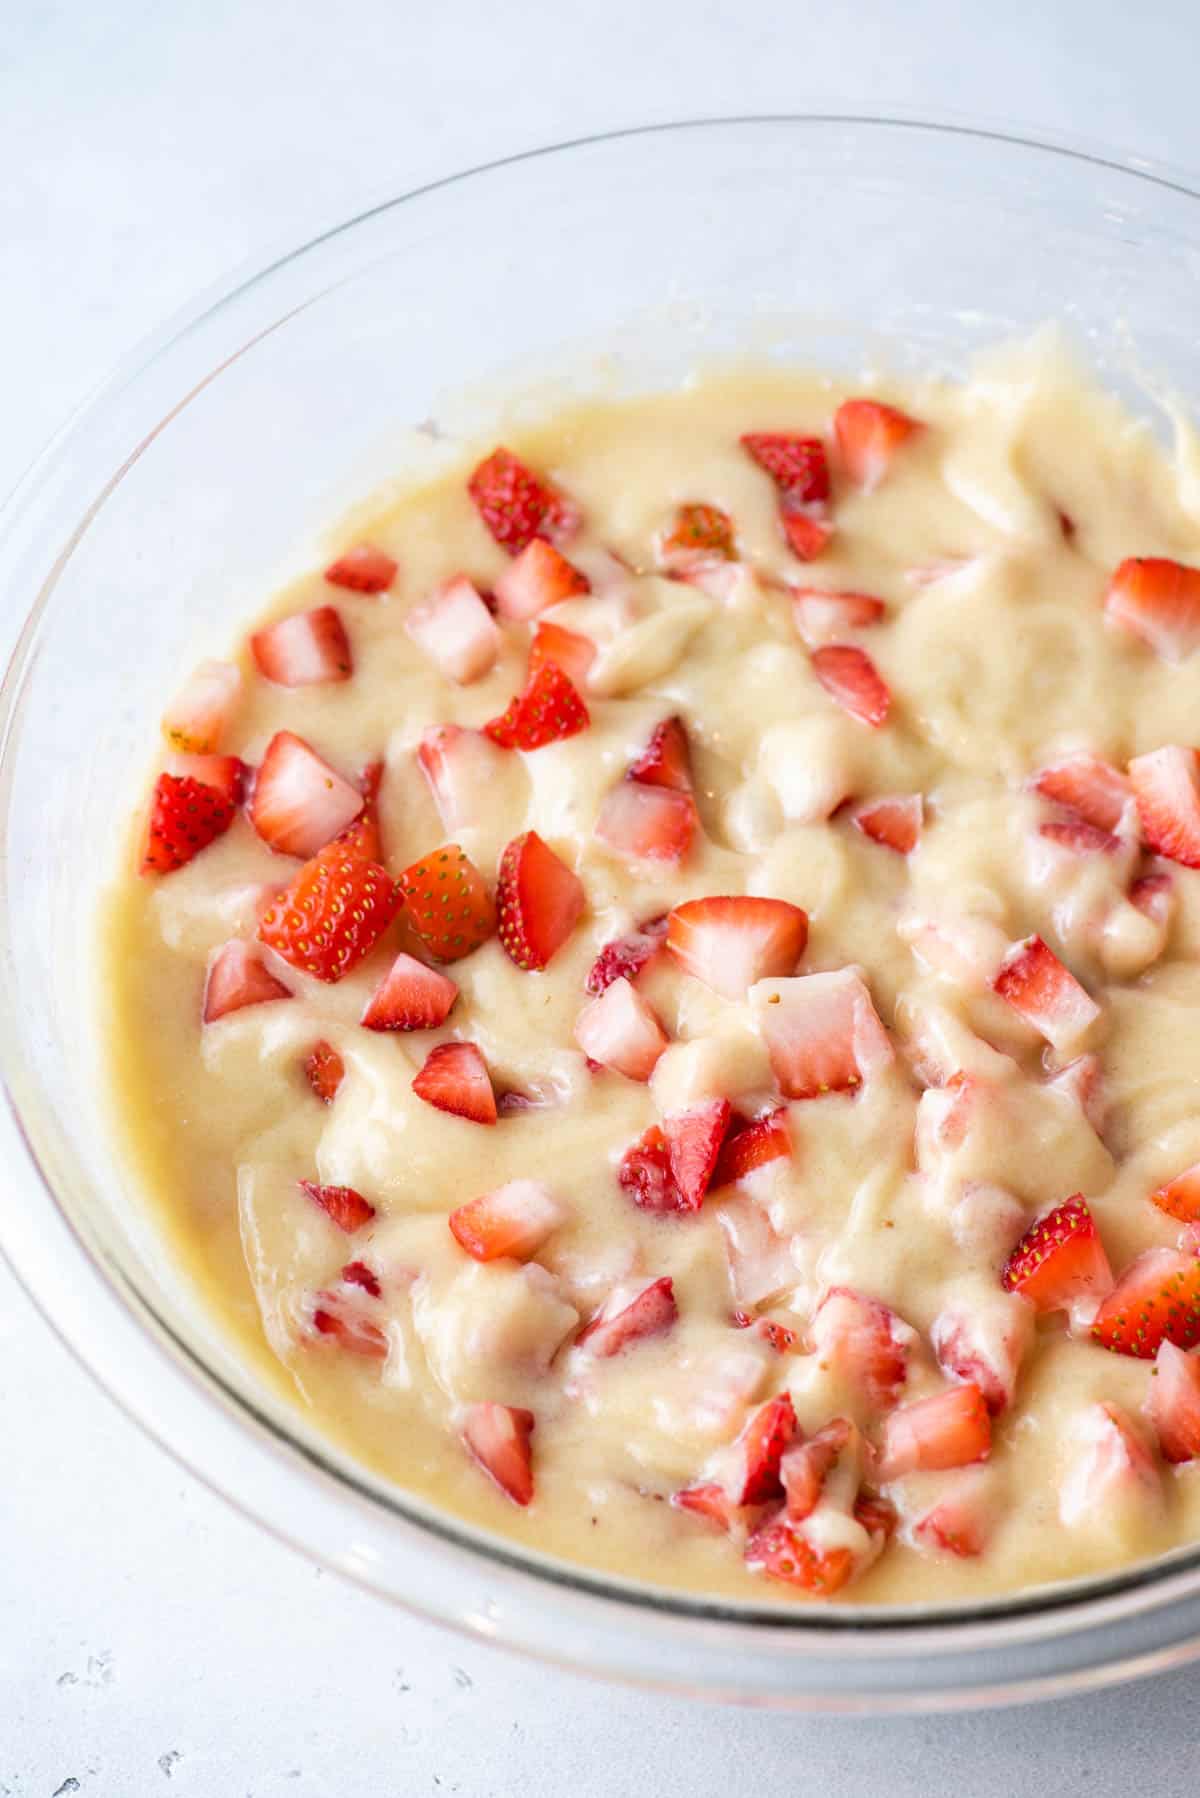 strawberry muffin batter in a clear glass bowl on a white surface